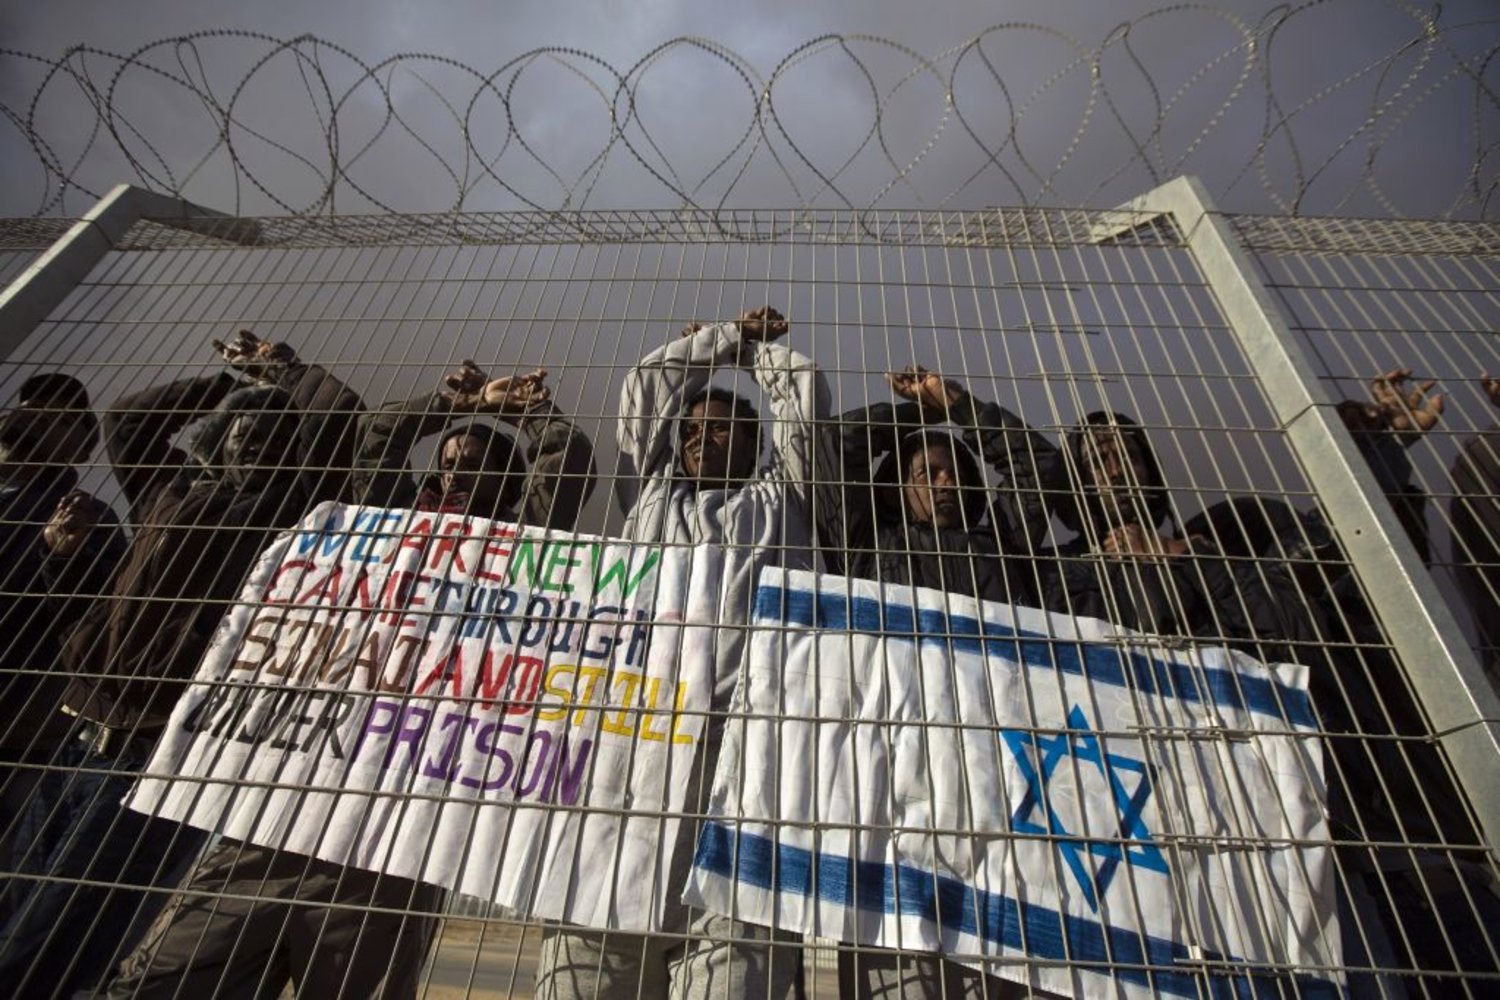 African migrants gesture behind a fence during a protest against Israel's detention policy towards them, at Holot, Israel's southern Negev desert detention center February 17, 2014.
REUTERS / AMIR COHEN